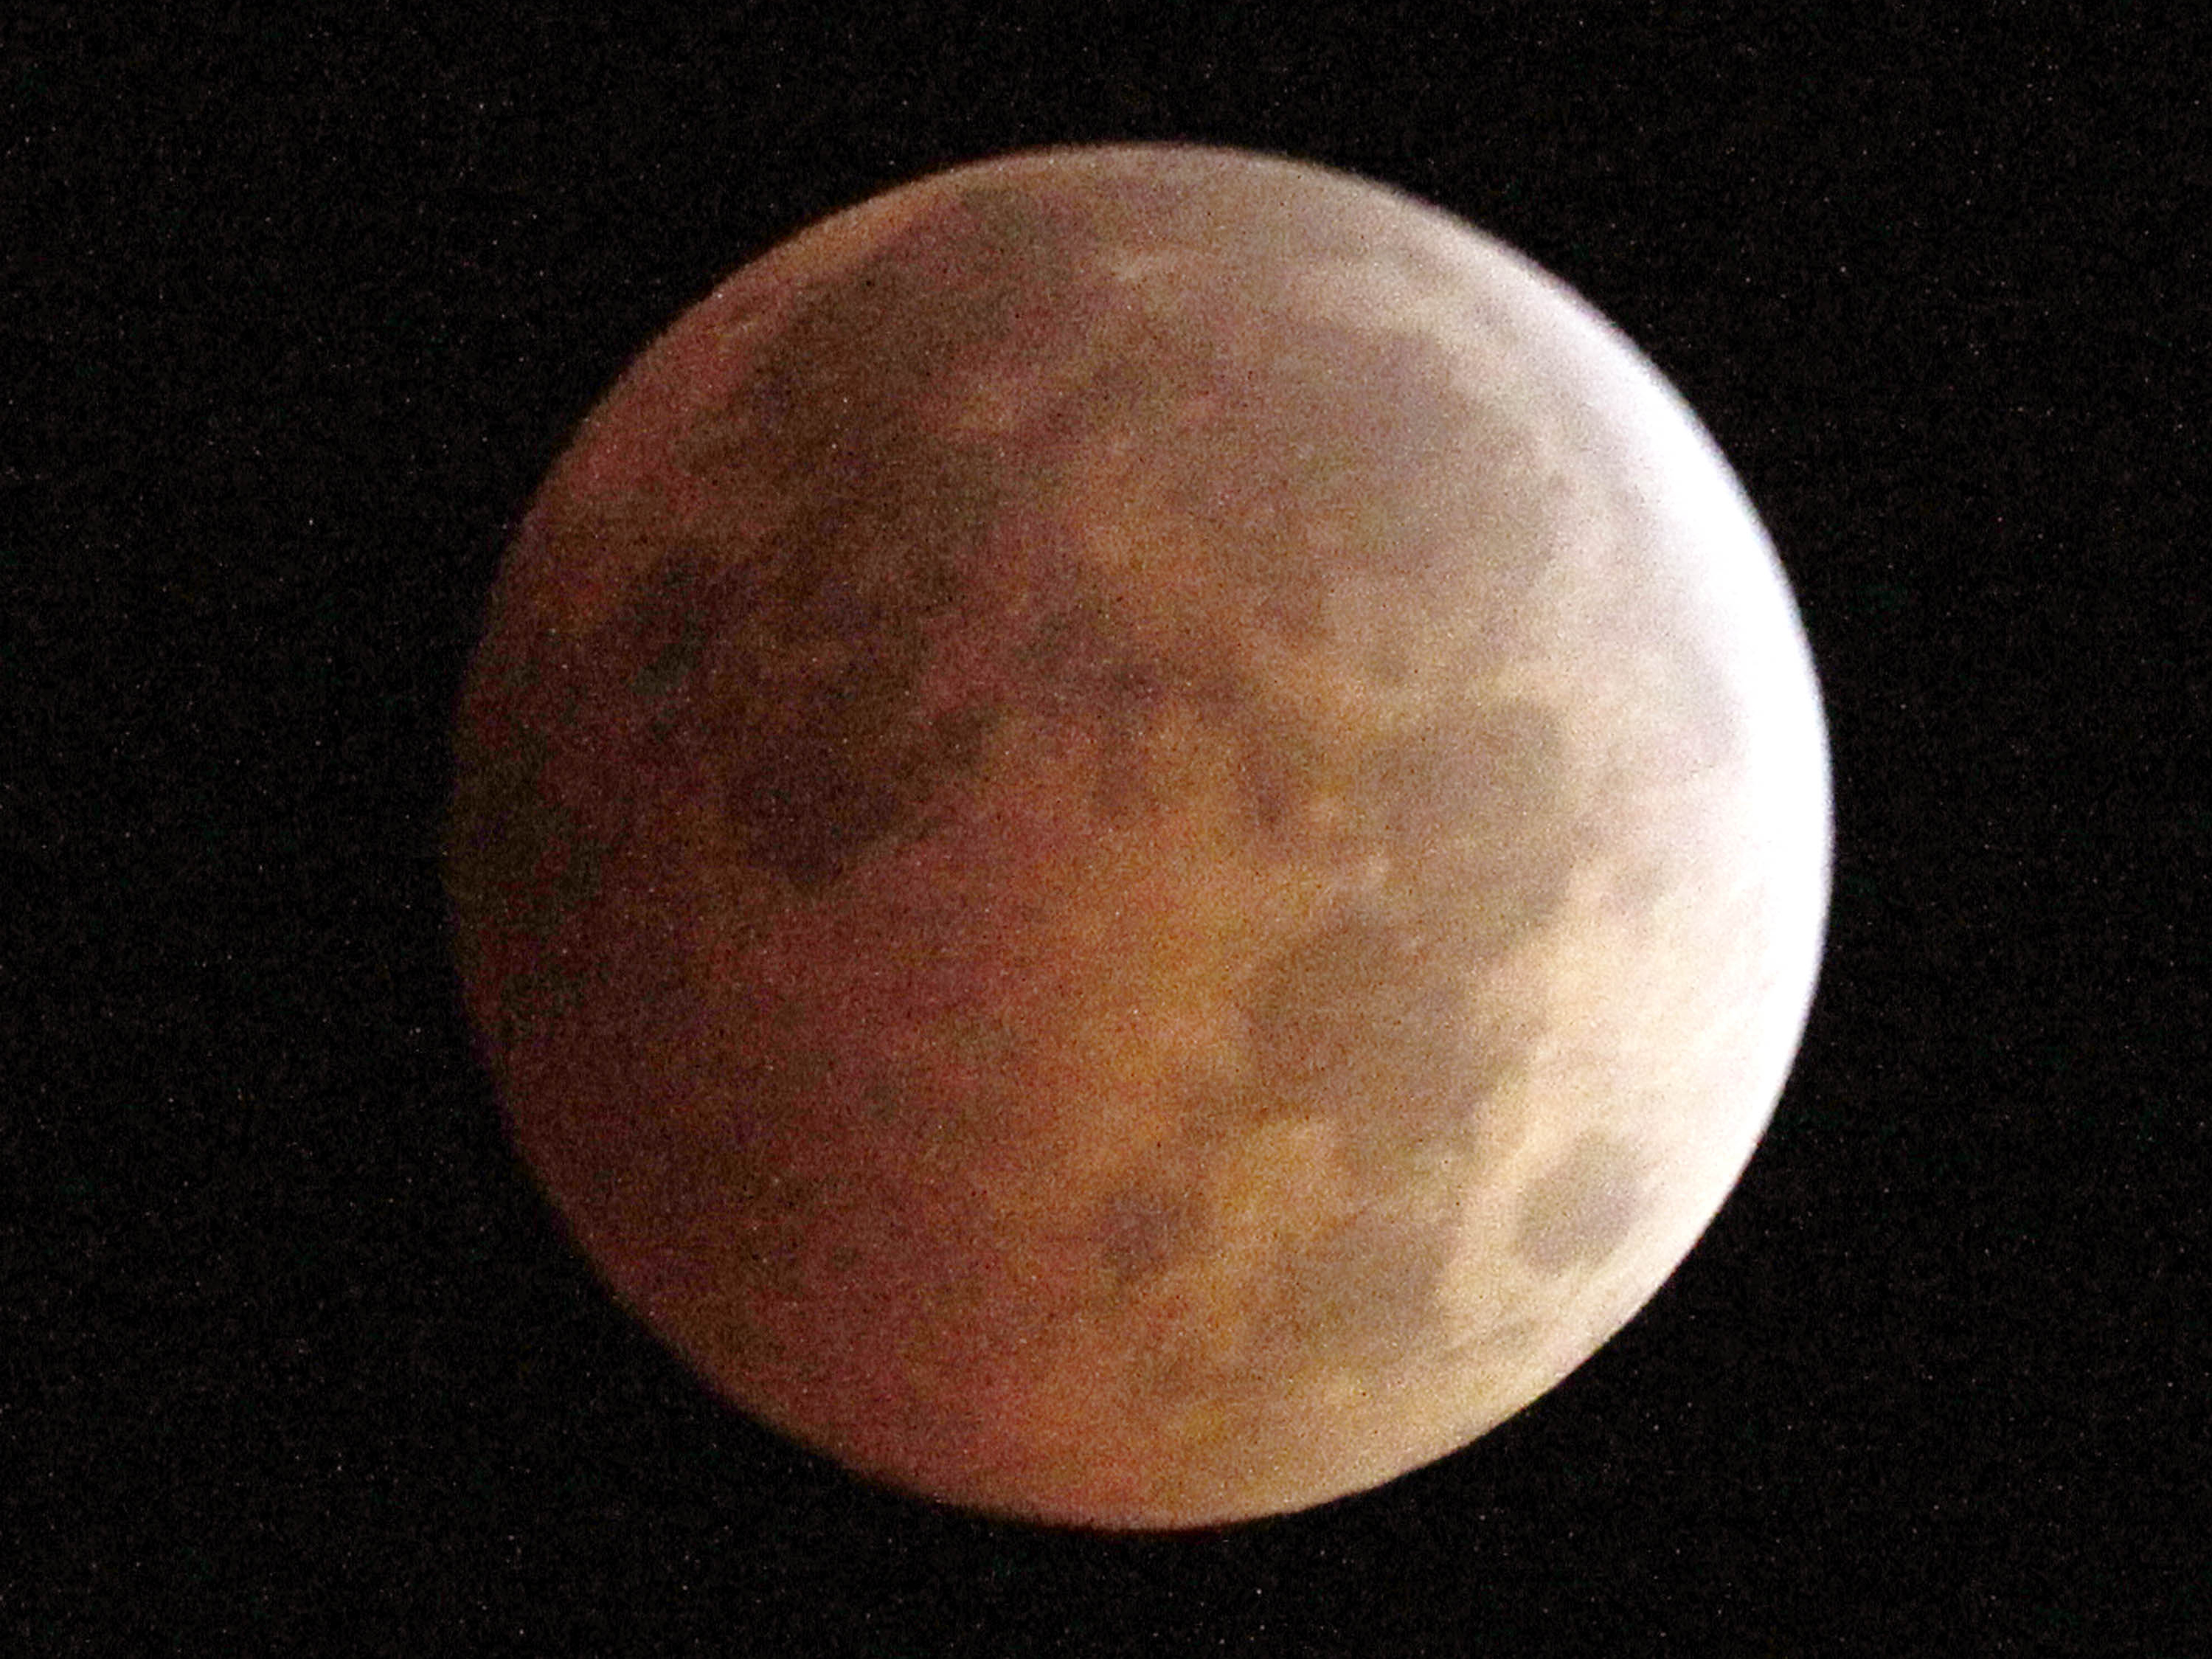 An Oct. 8, 2014, photo shows the blood moon, created by the full moon passing into the shadow of Earth during a total lunar eclipse, as seen from Monterey Park, Calif. Sky-watchers will get a chance to see another "blood moon" eclipse on Sunday. Nick Ut/AP